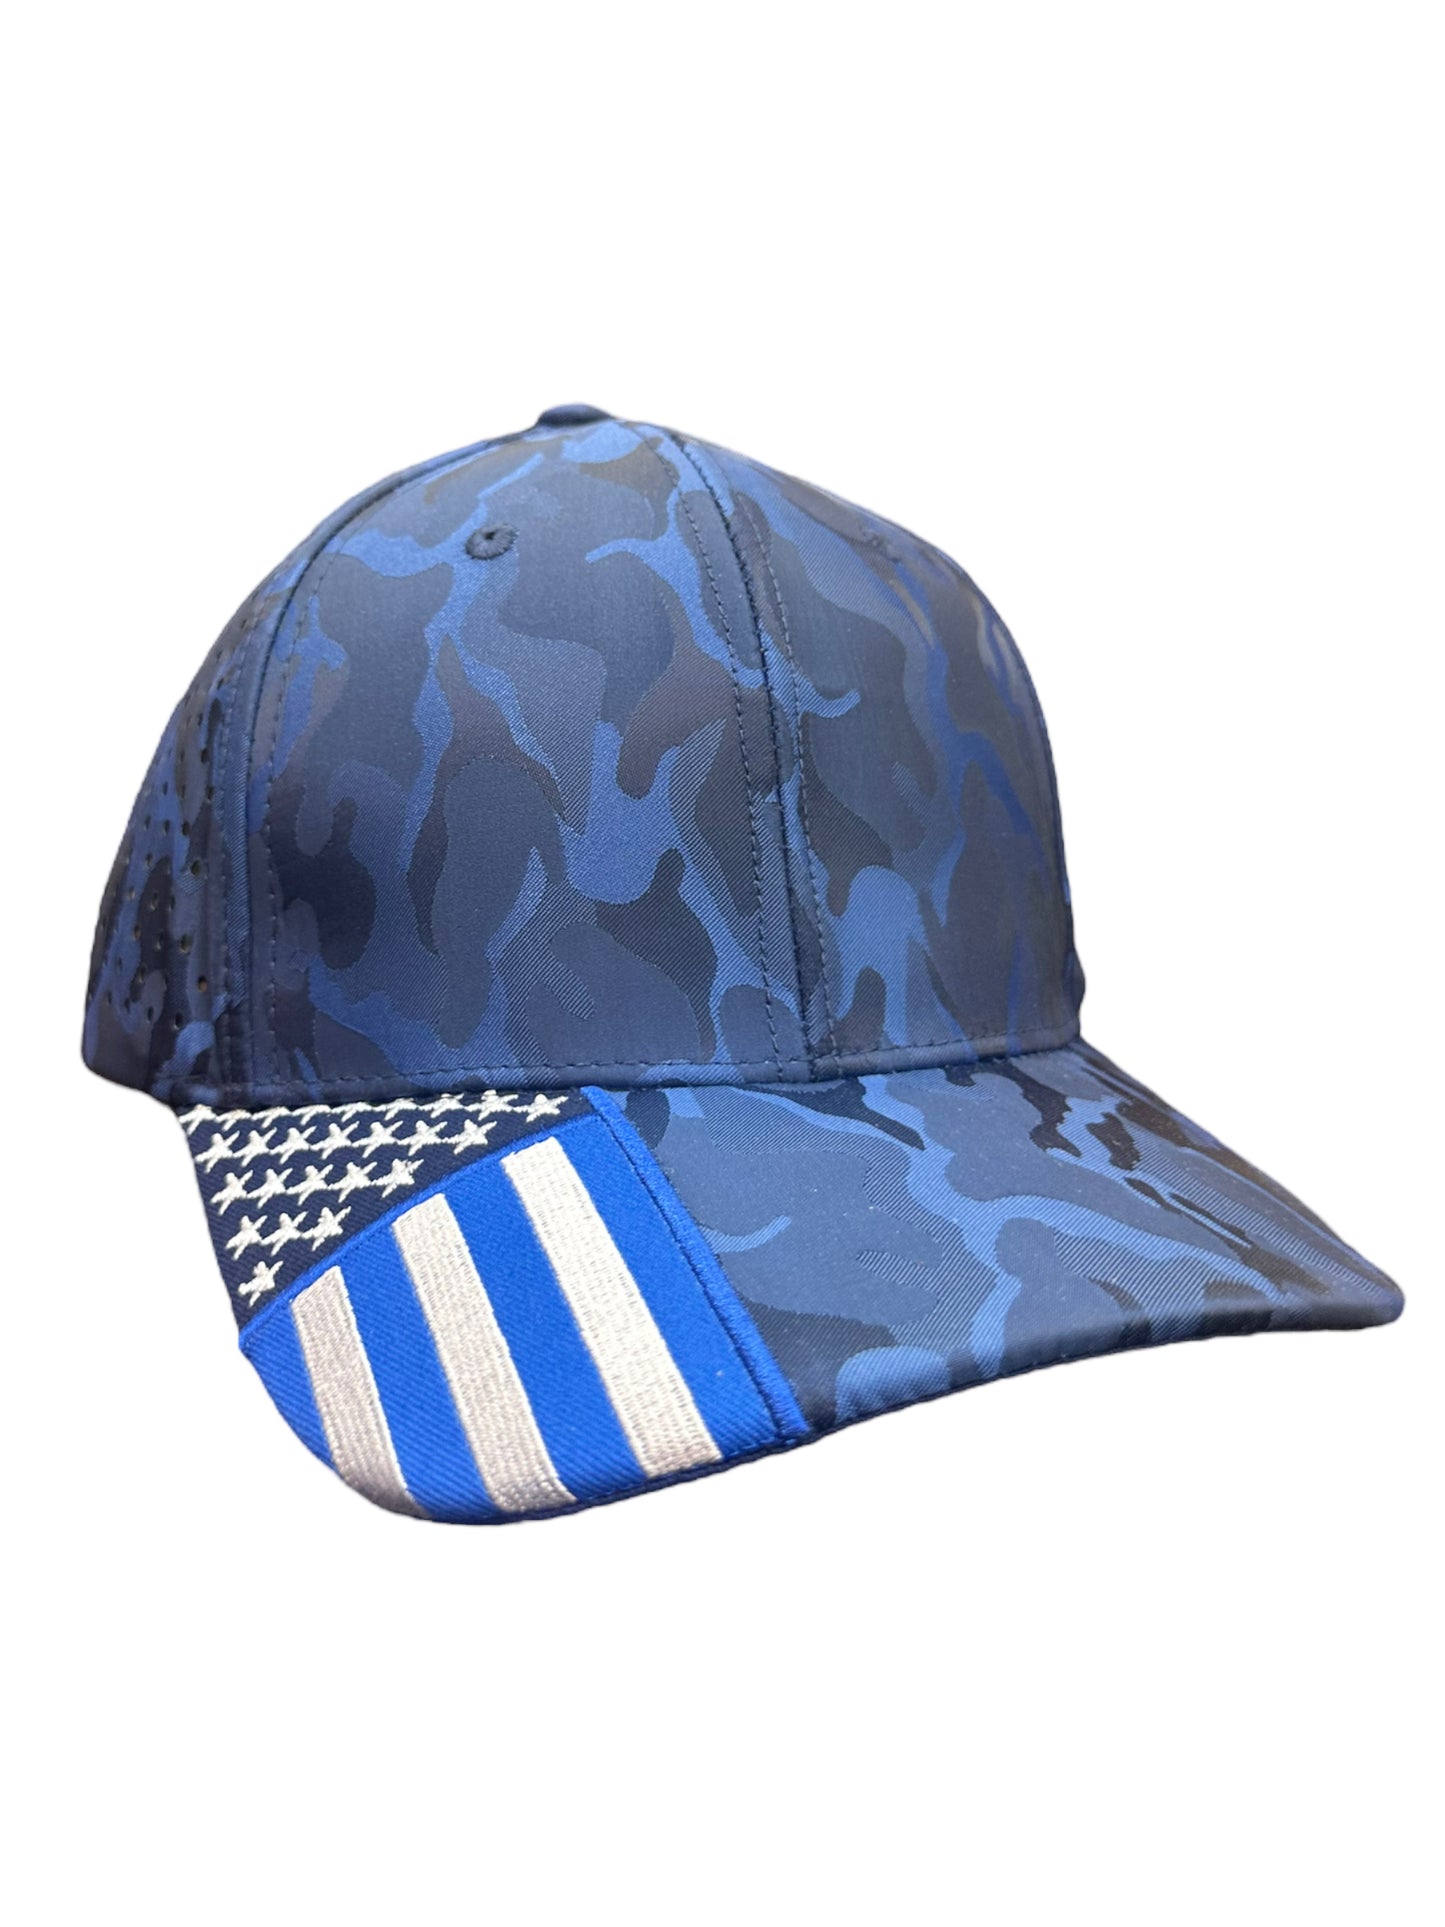 American Blue Camouflage SnapBack Curved bil